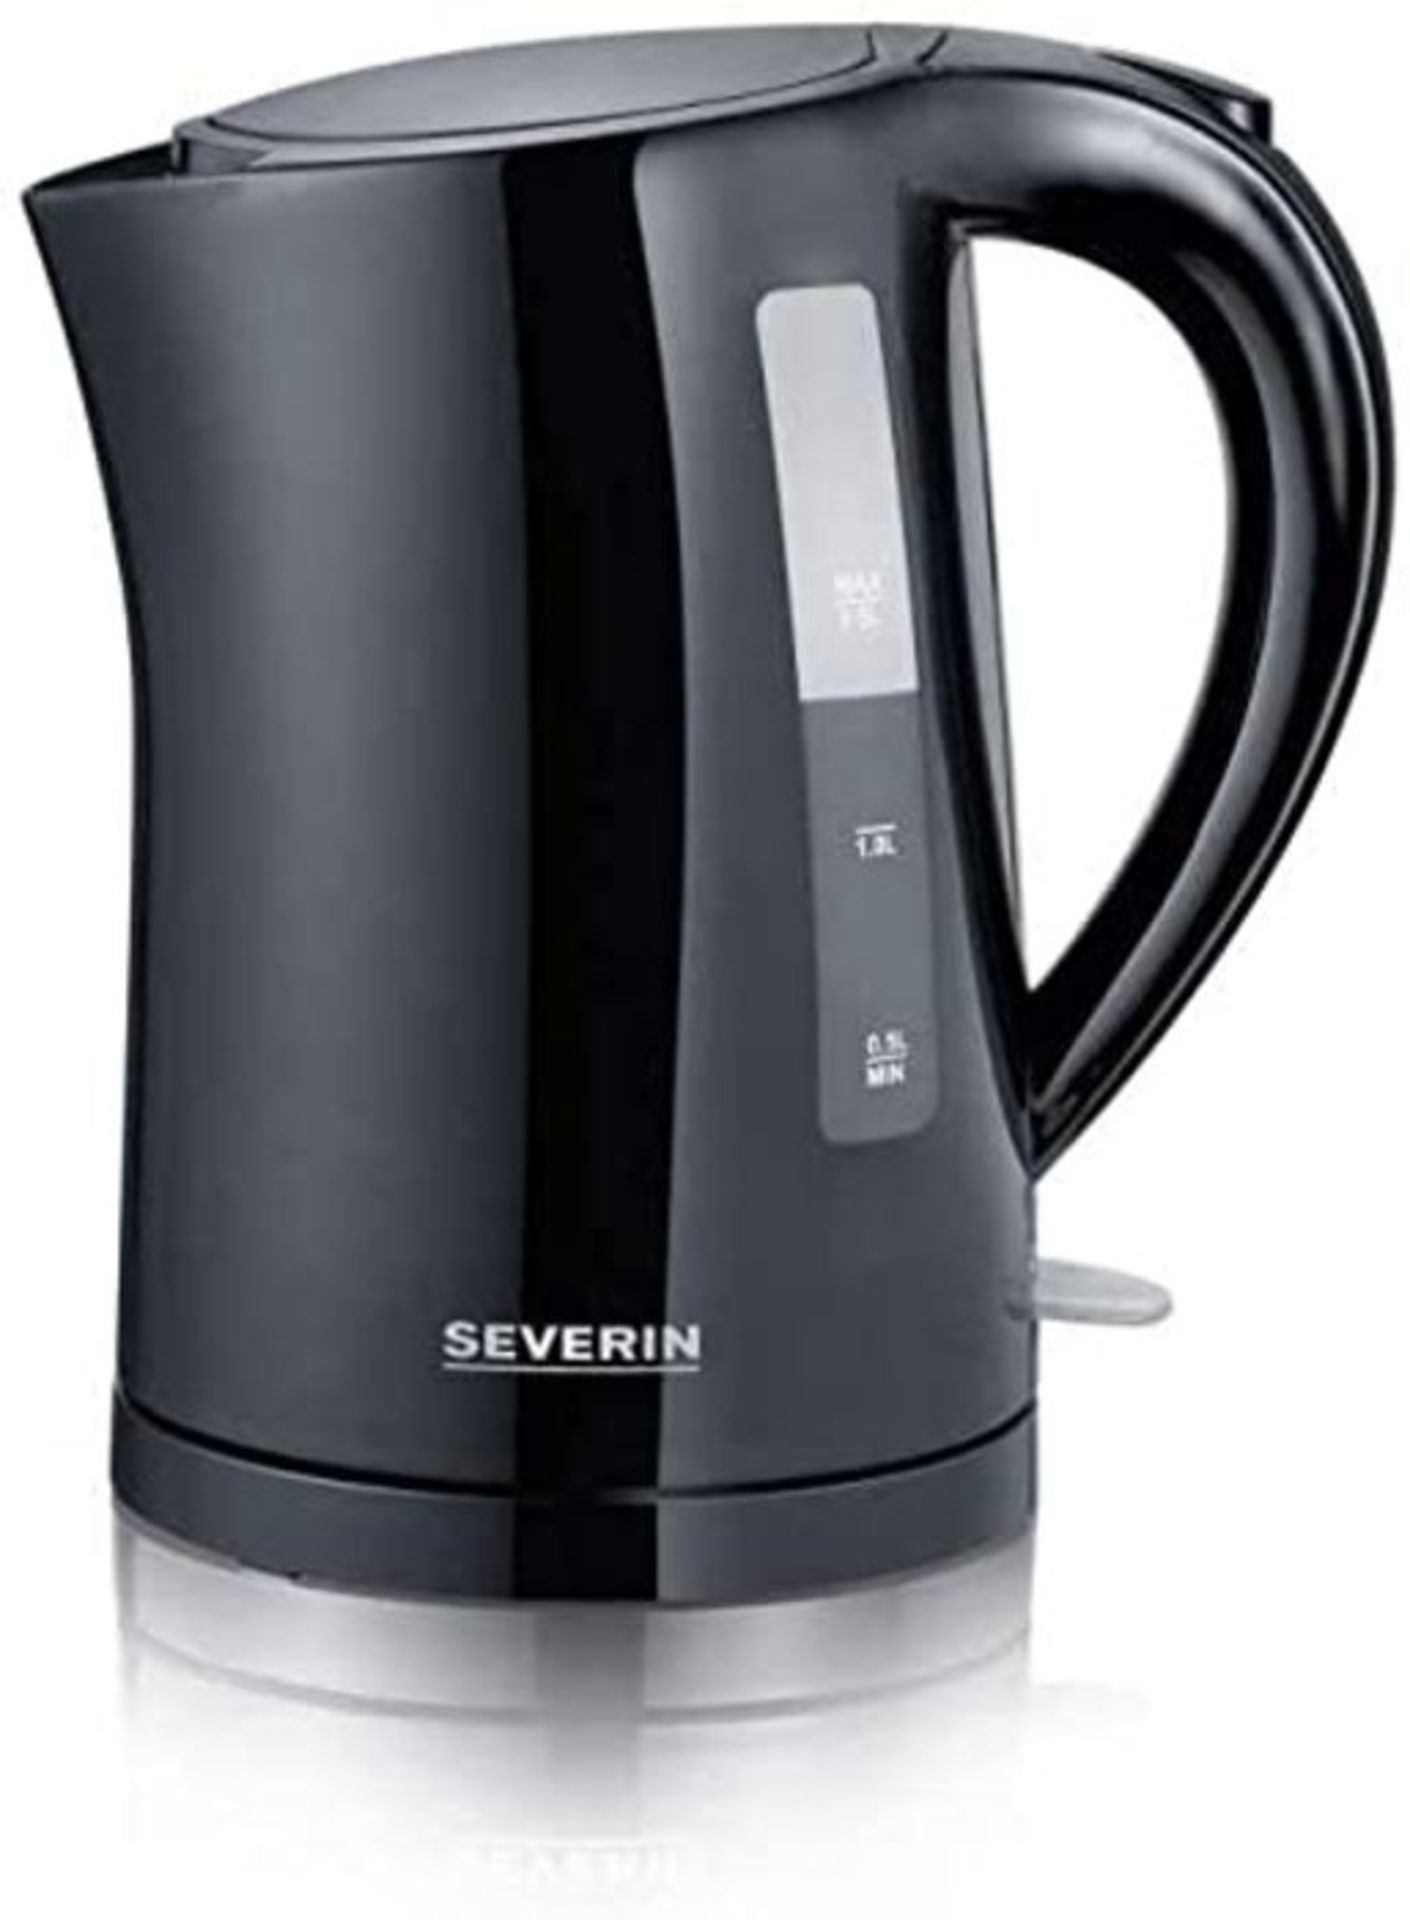 Severin Jug Electric Kettle with 2200 W of Power WK 3498, Black